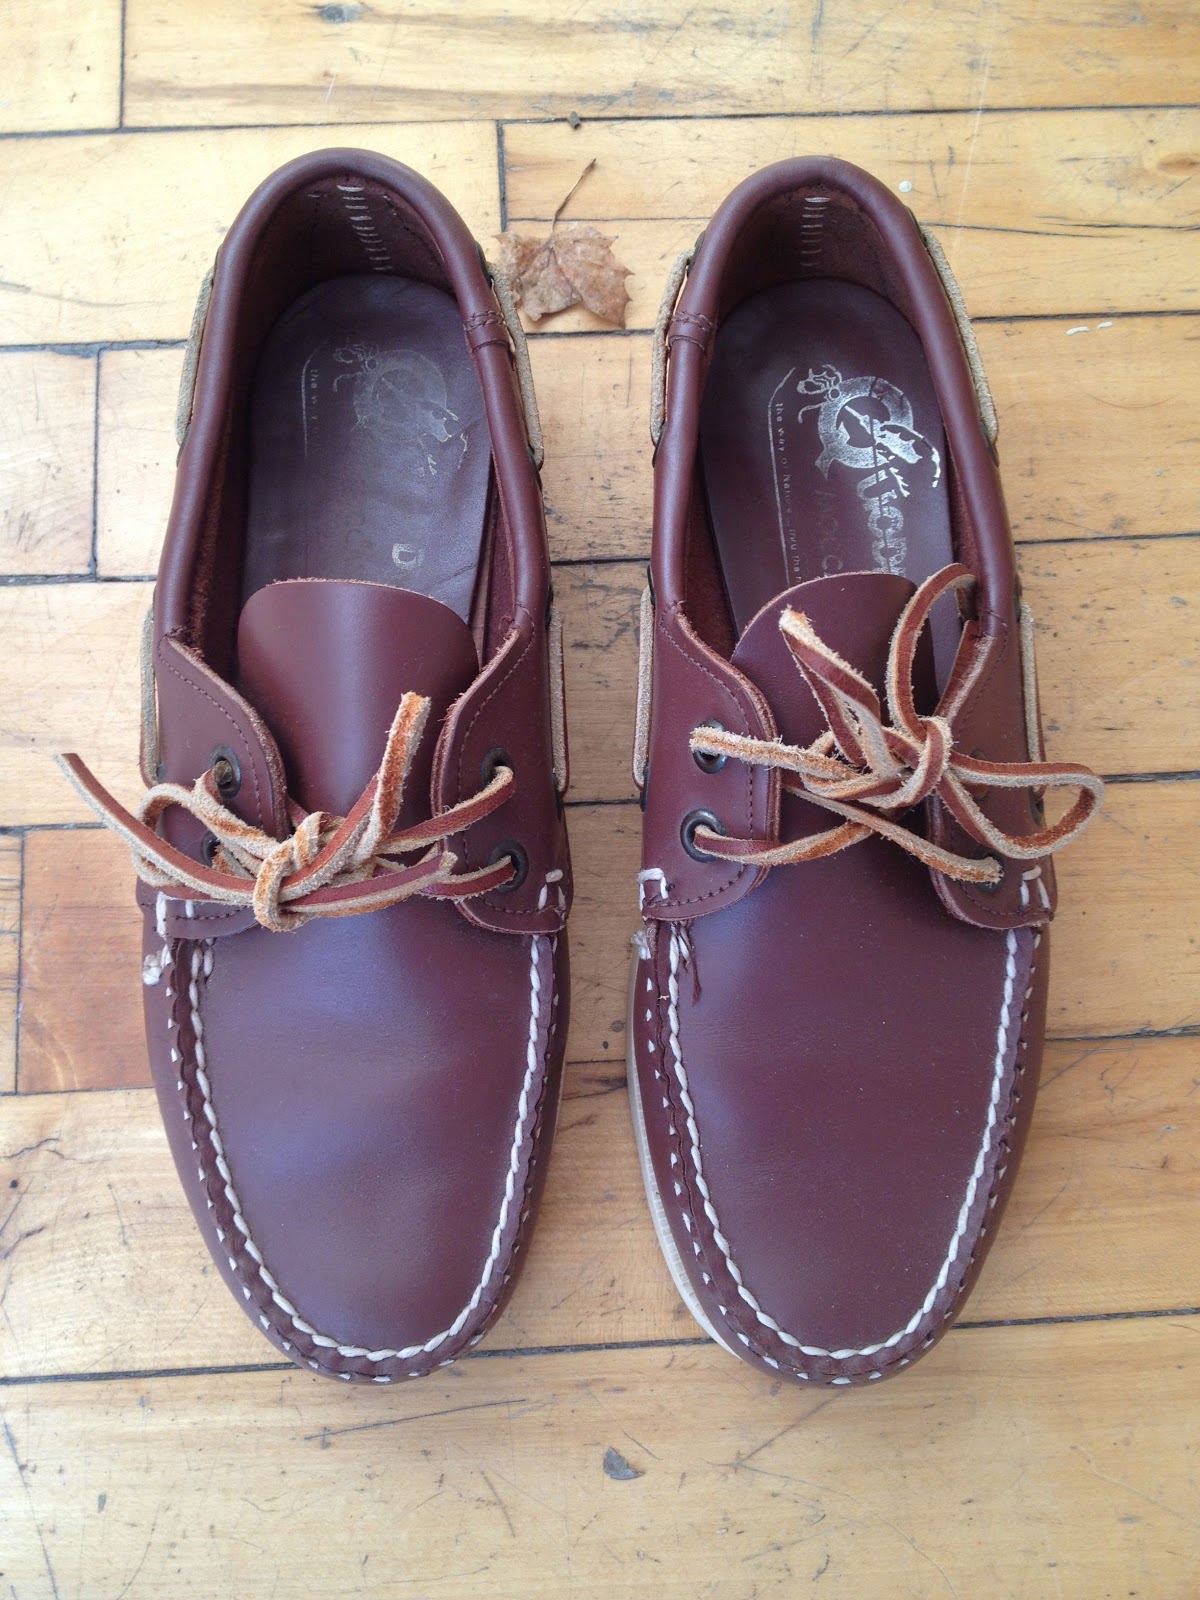 laws of general economy: Quoddy moccasin / boat shoes size 6.5N